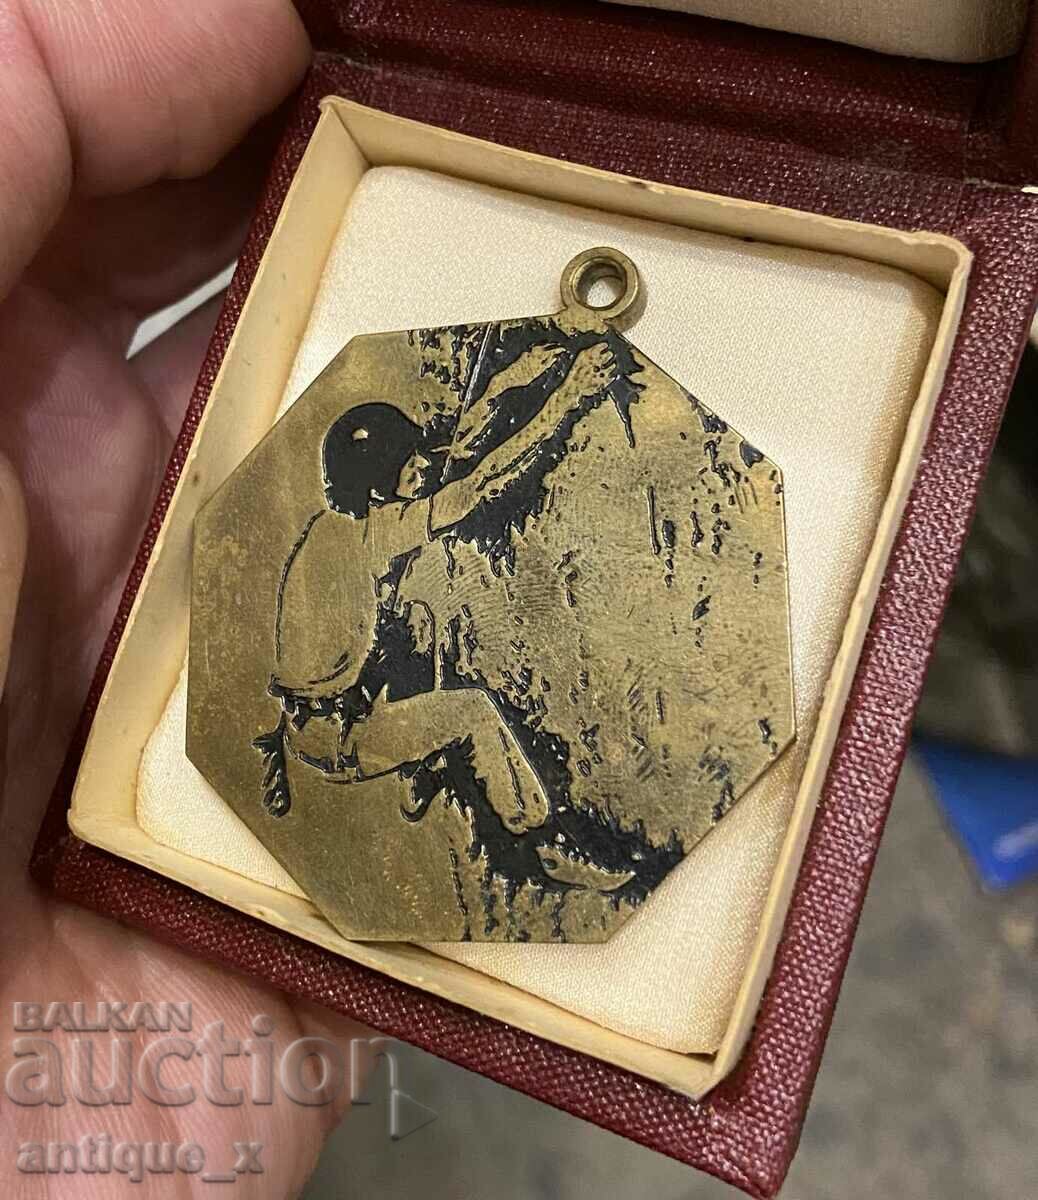 Soc. medal from the Republican Rock Climbing Championship-I